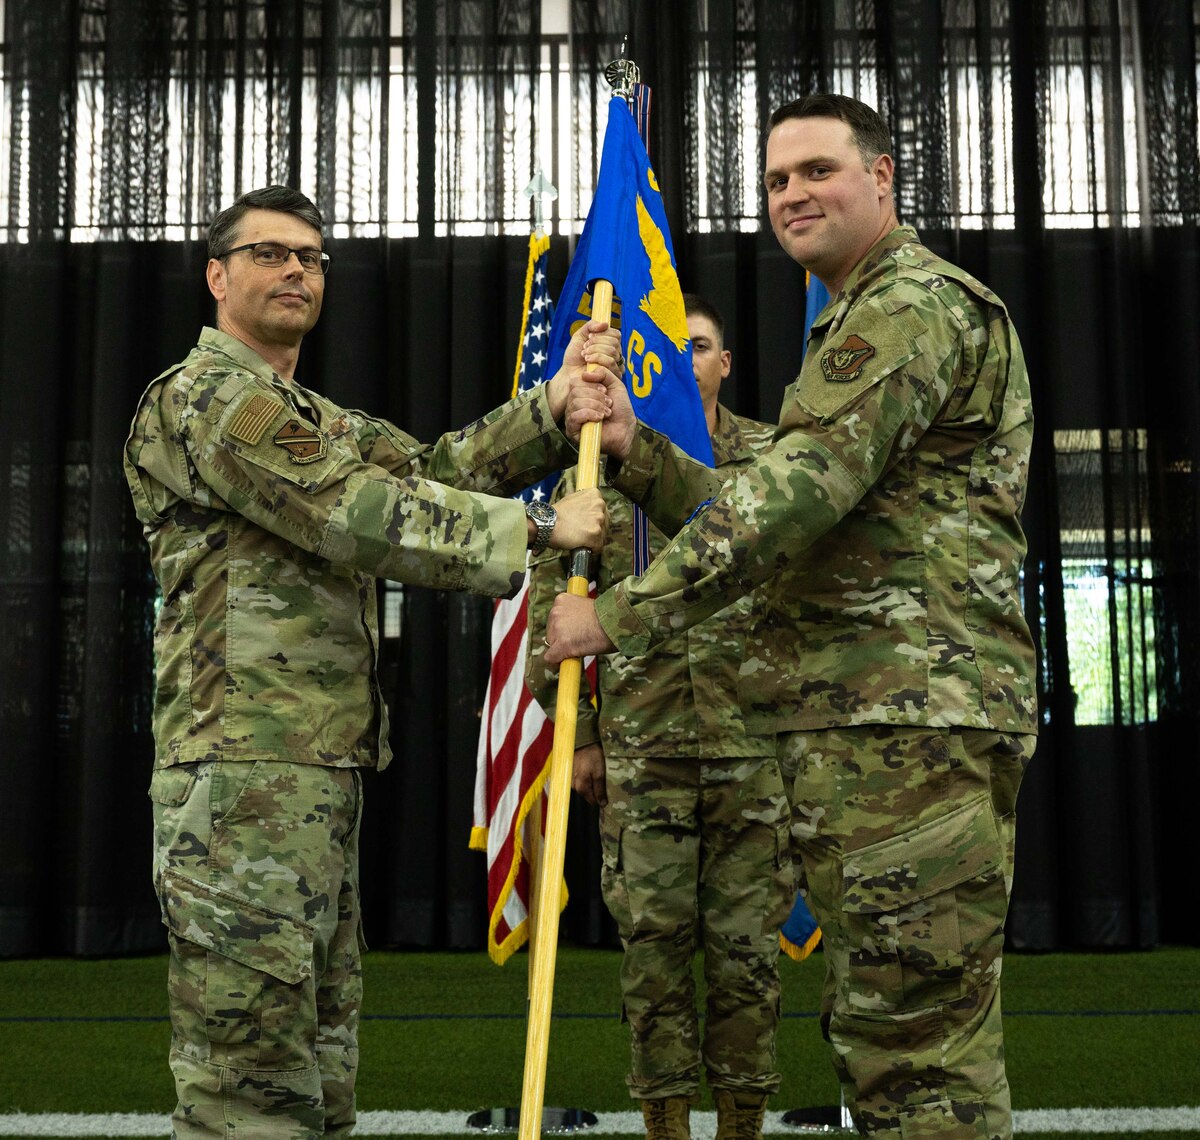 U.S. Air Force Col. Stuart Williamson, the 354th Mission Support Group commander (left), passes the 354th Communications Squadron (CS) guidon to Maj. Daniel Campbell, the 354th CS commander, during a change of command ceremony at Eielson Air Force Base, Alaska, July 9, 2021.